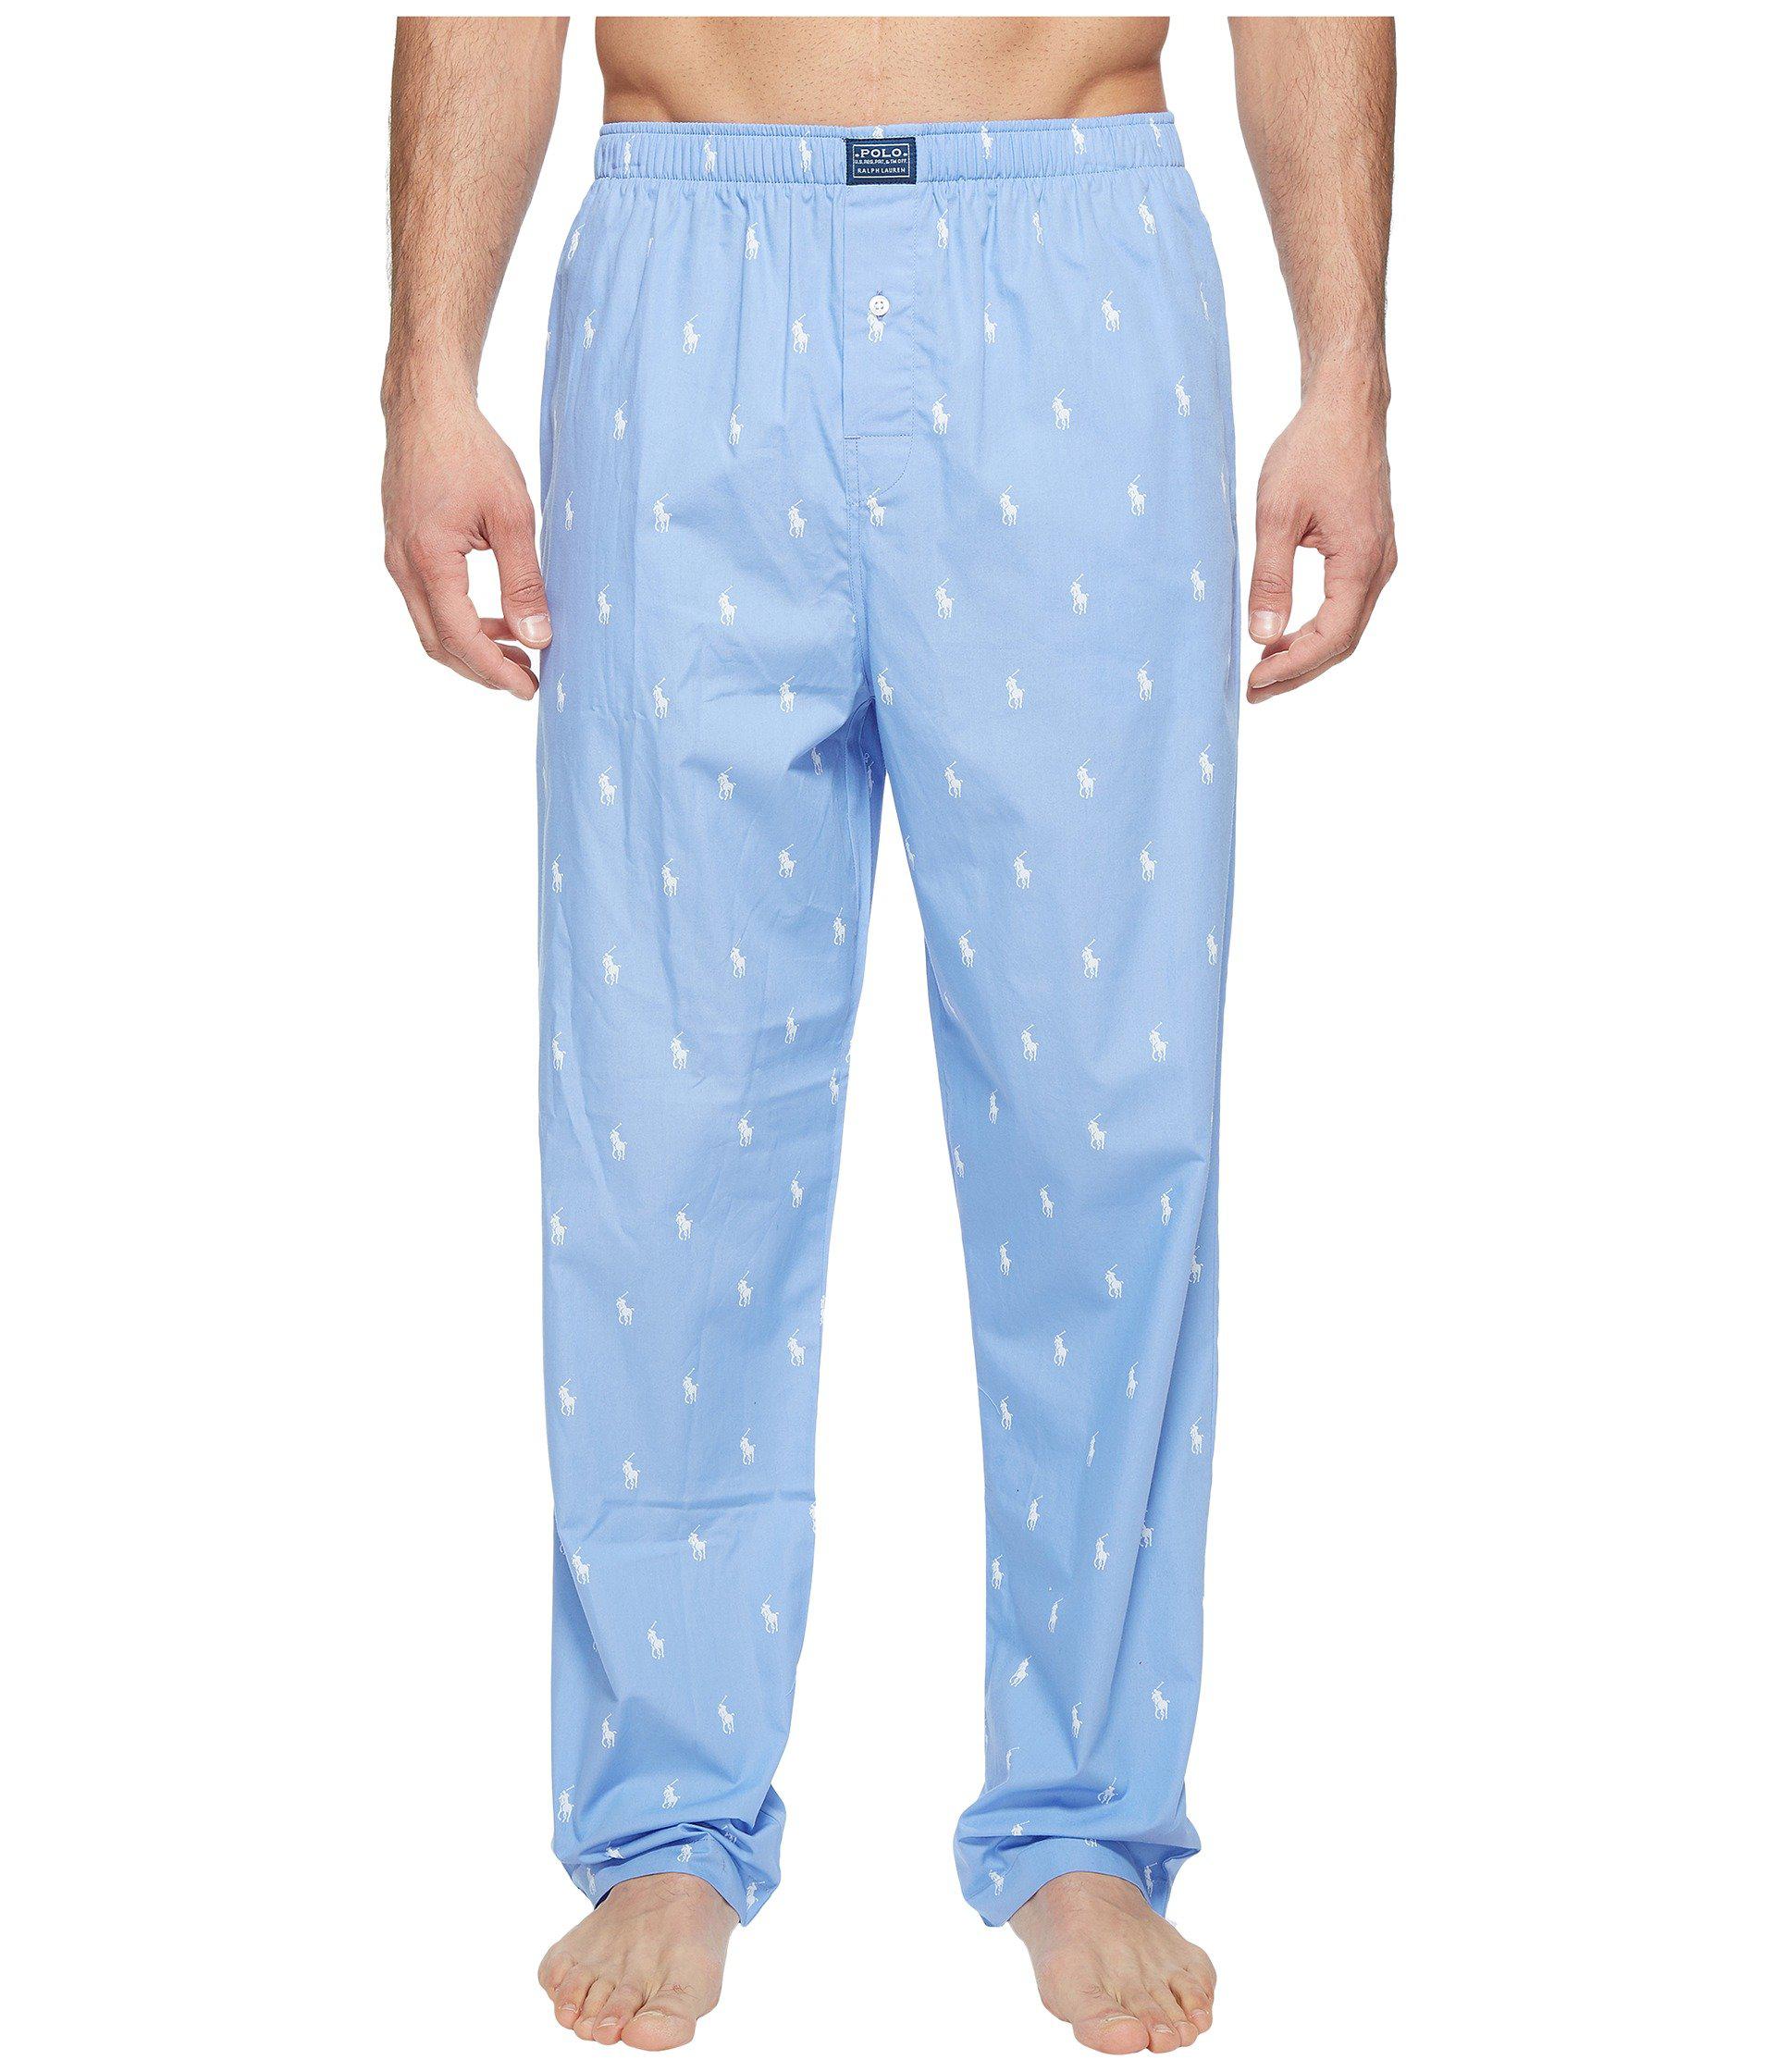 Lyst - Polo Ralph Lauren All Over Pony Player Woven Pants in Blue for Men